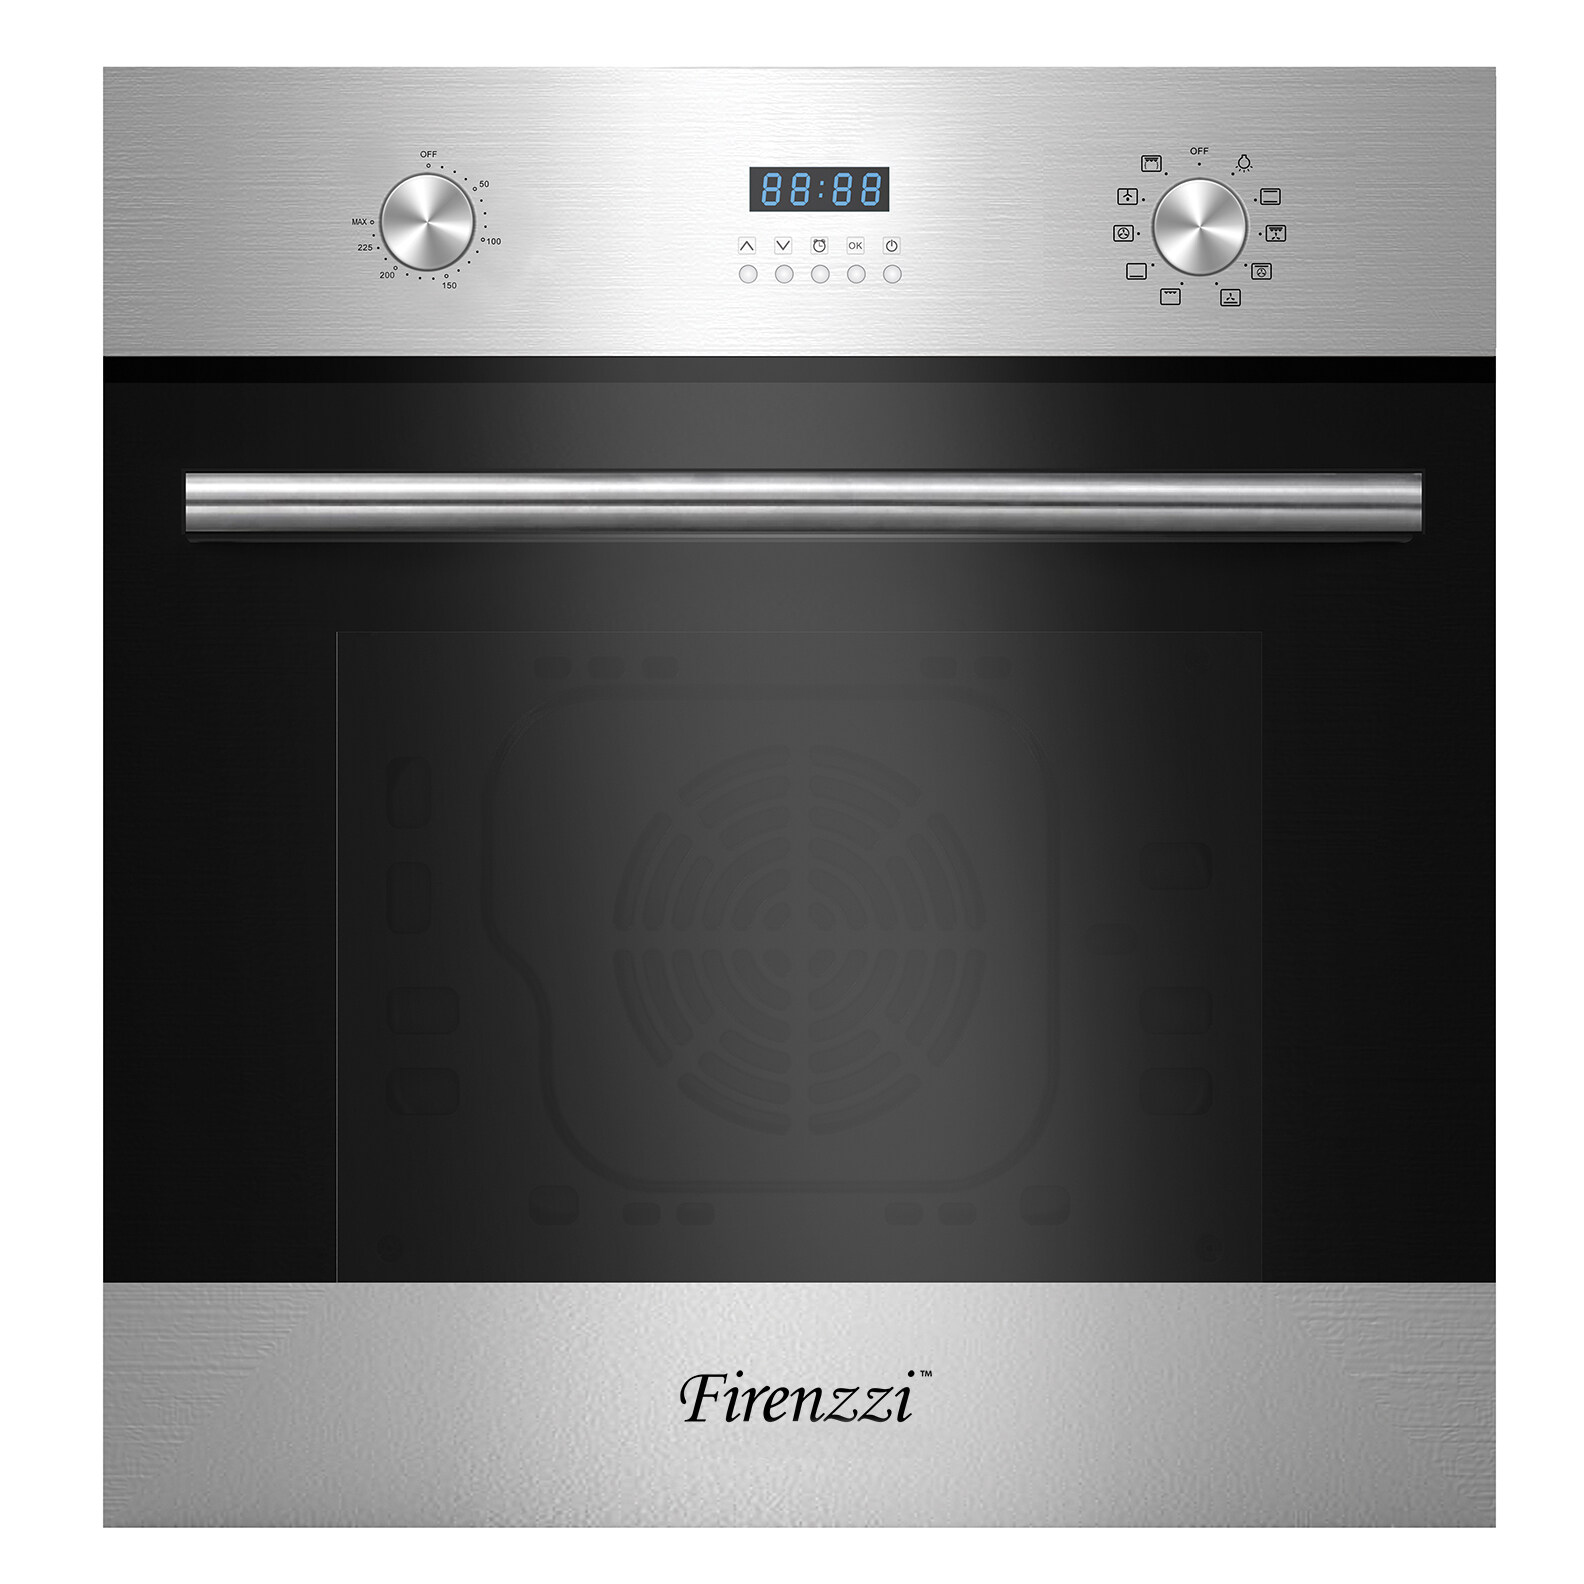 Firenzzi FBO-6177 Professional Built-in Oven with 1 Year Warranty (65 Litres & 10 Cooking Function)